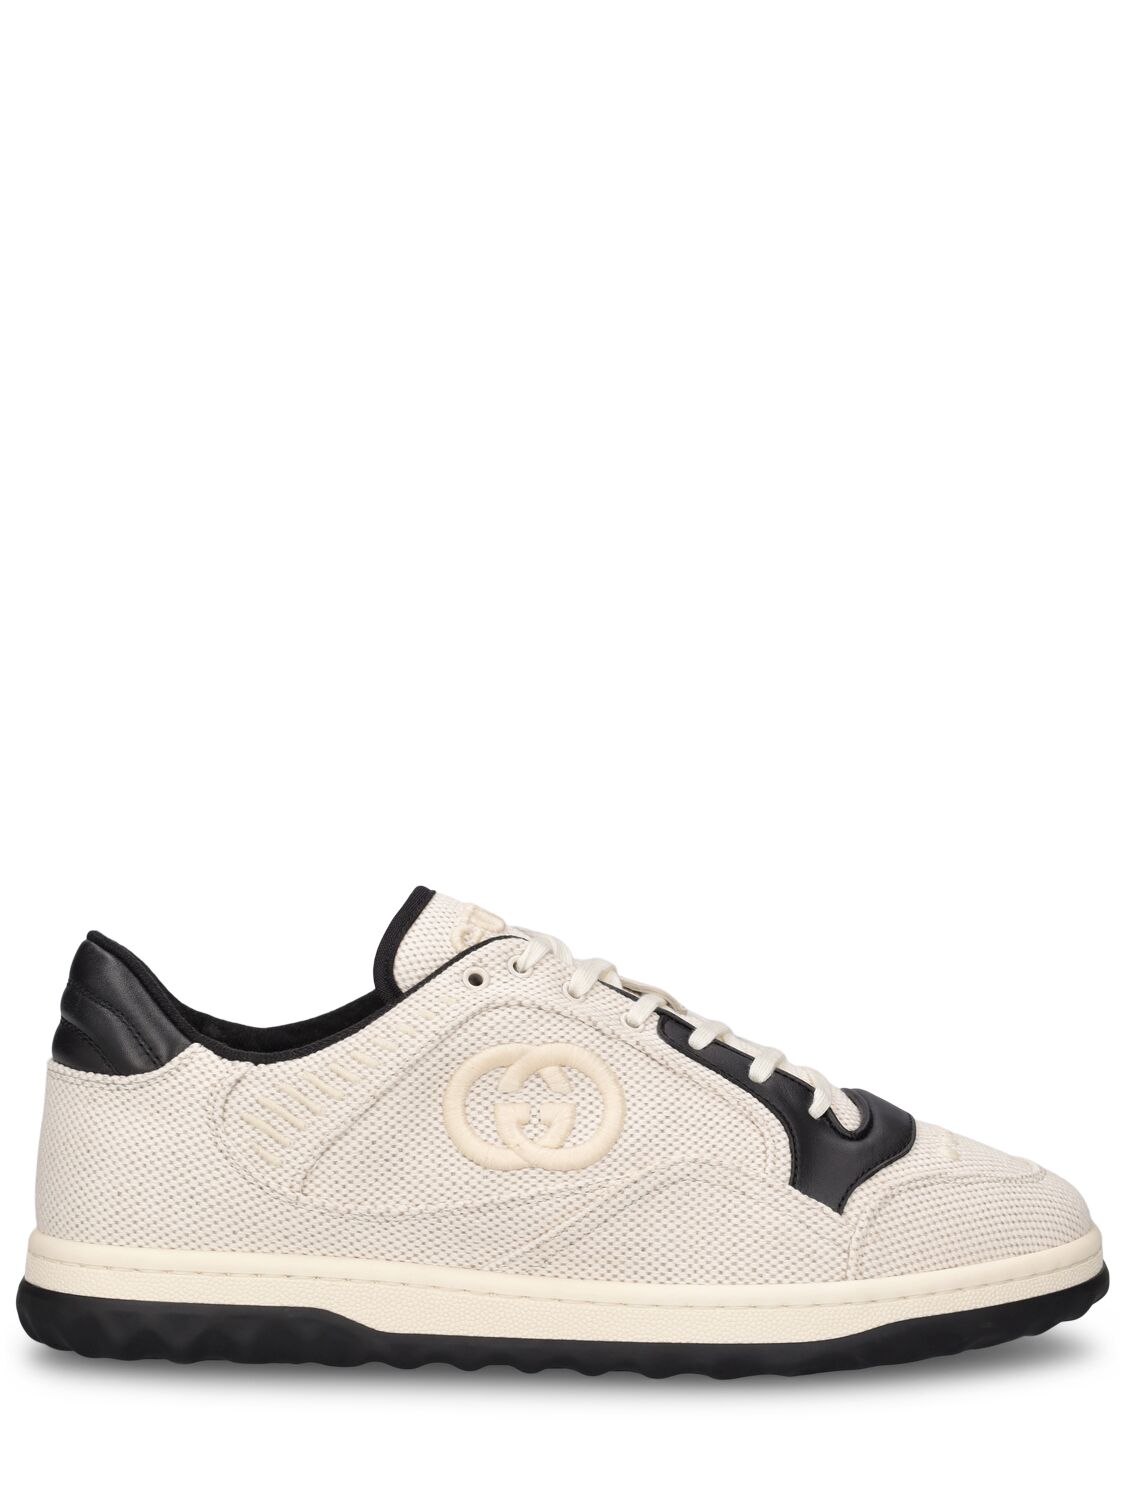 Gucci Mac80 Leather Sneakers In White,blue